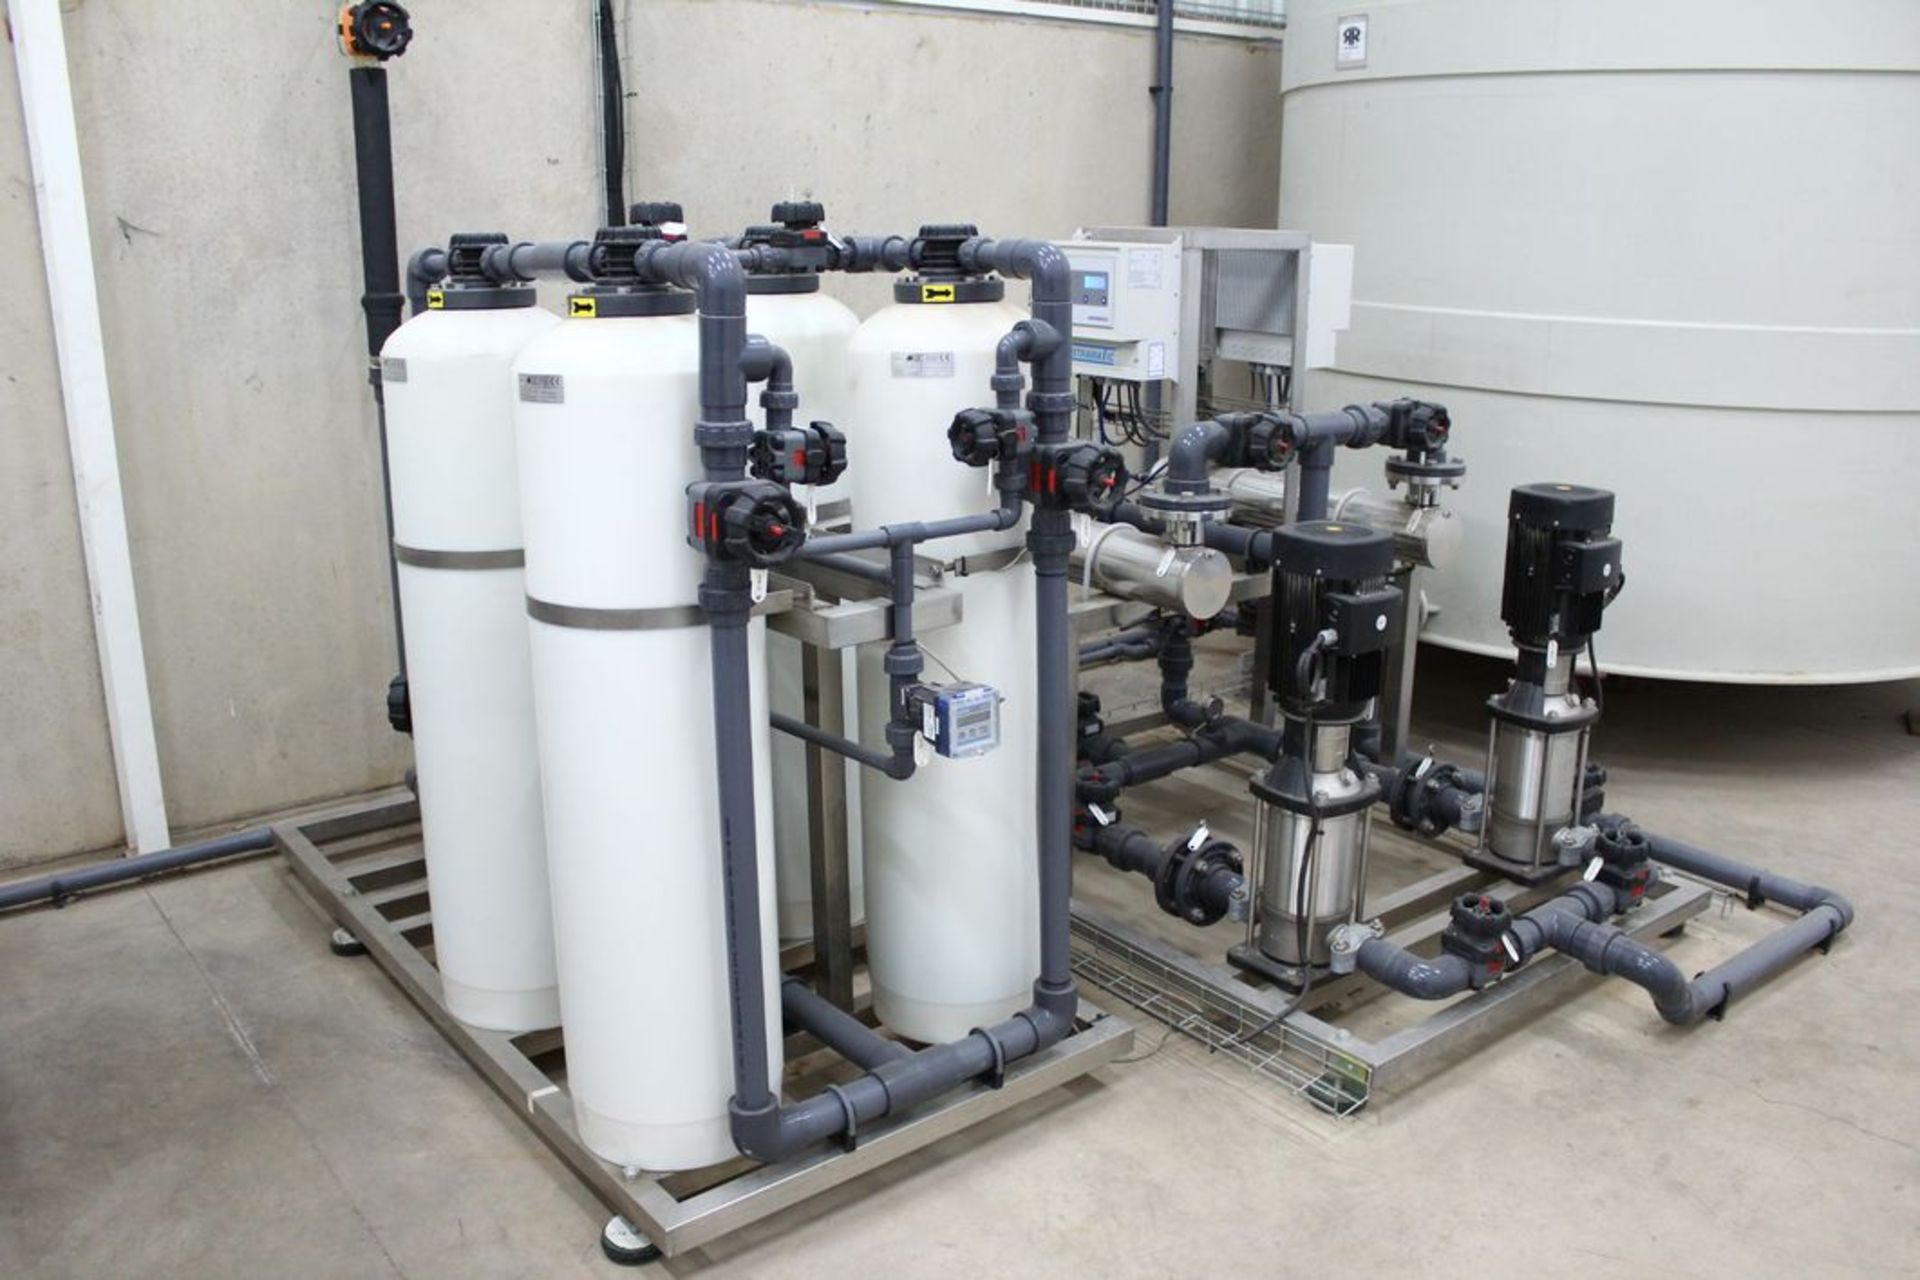 Water treatment system - Image 11 of 17